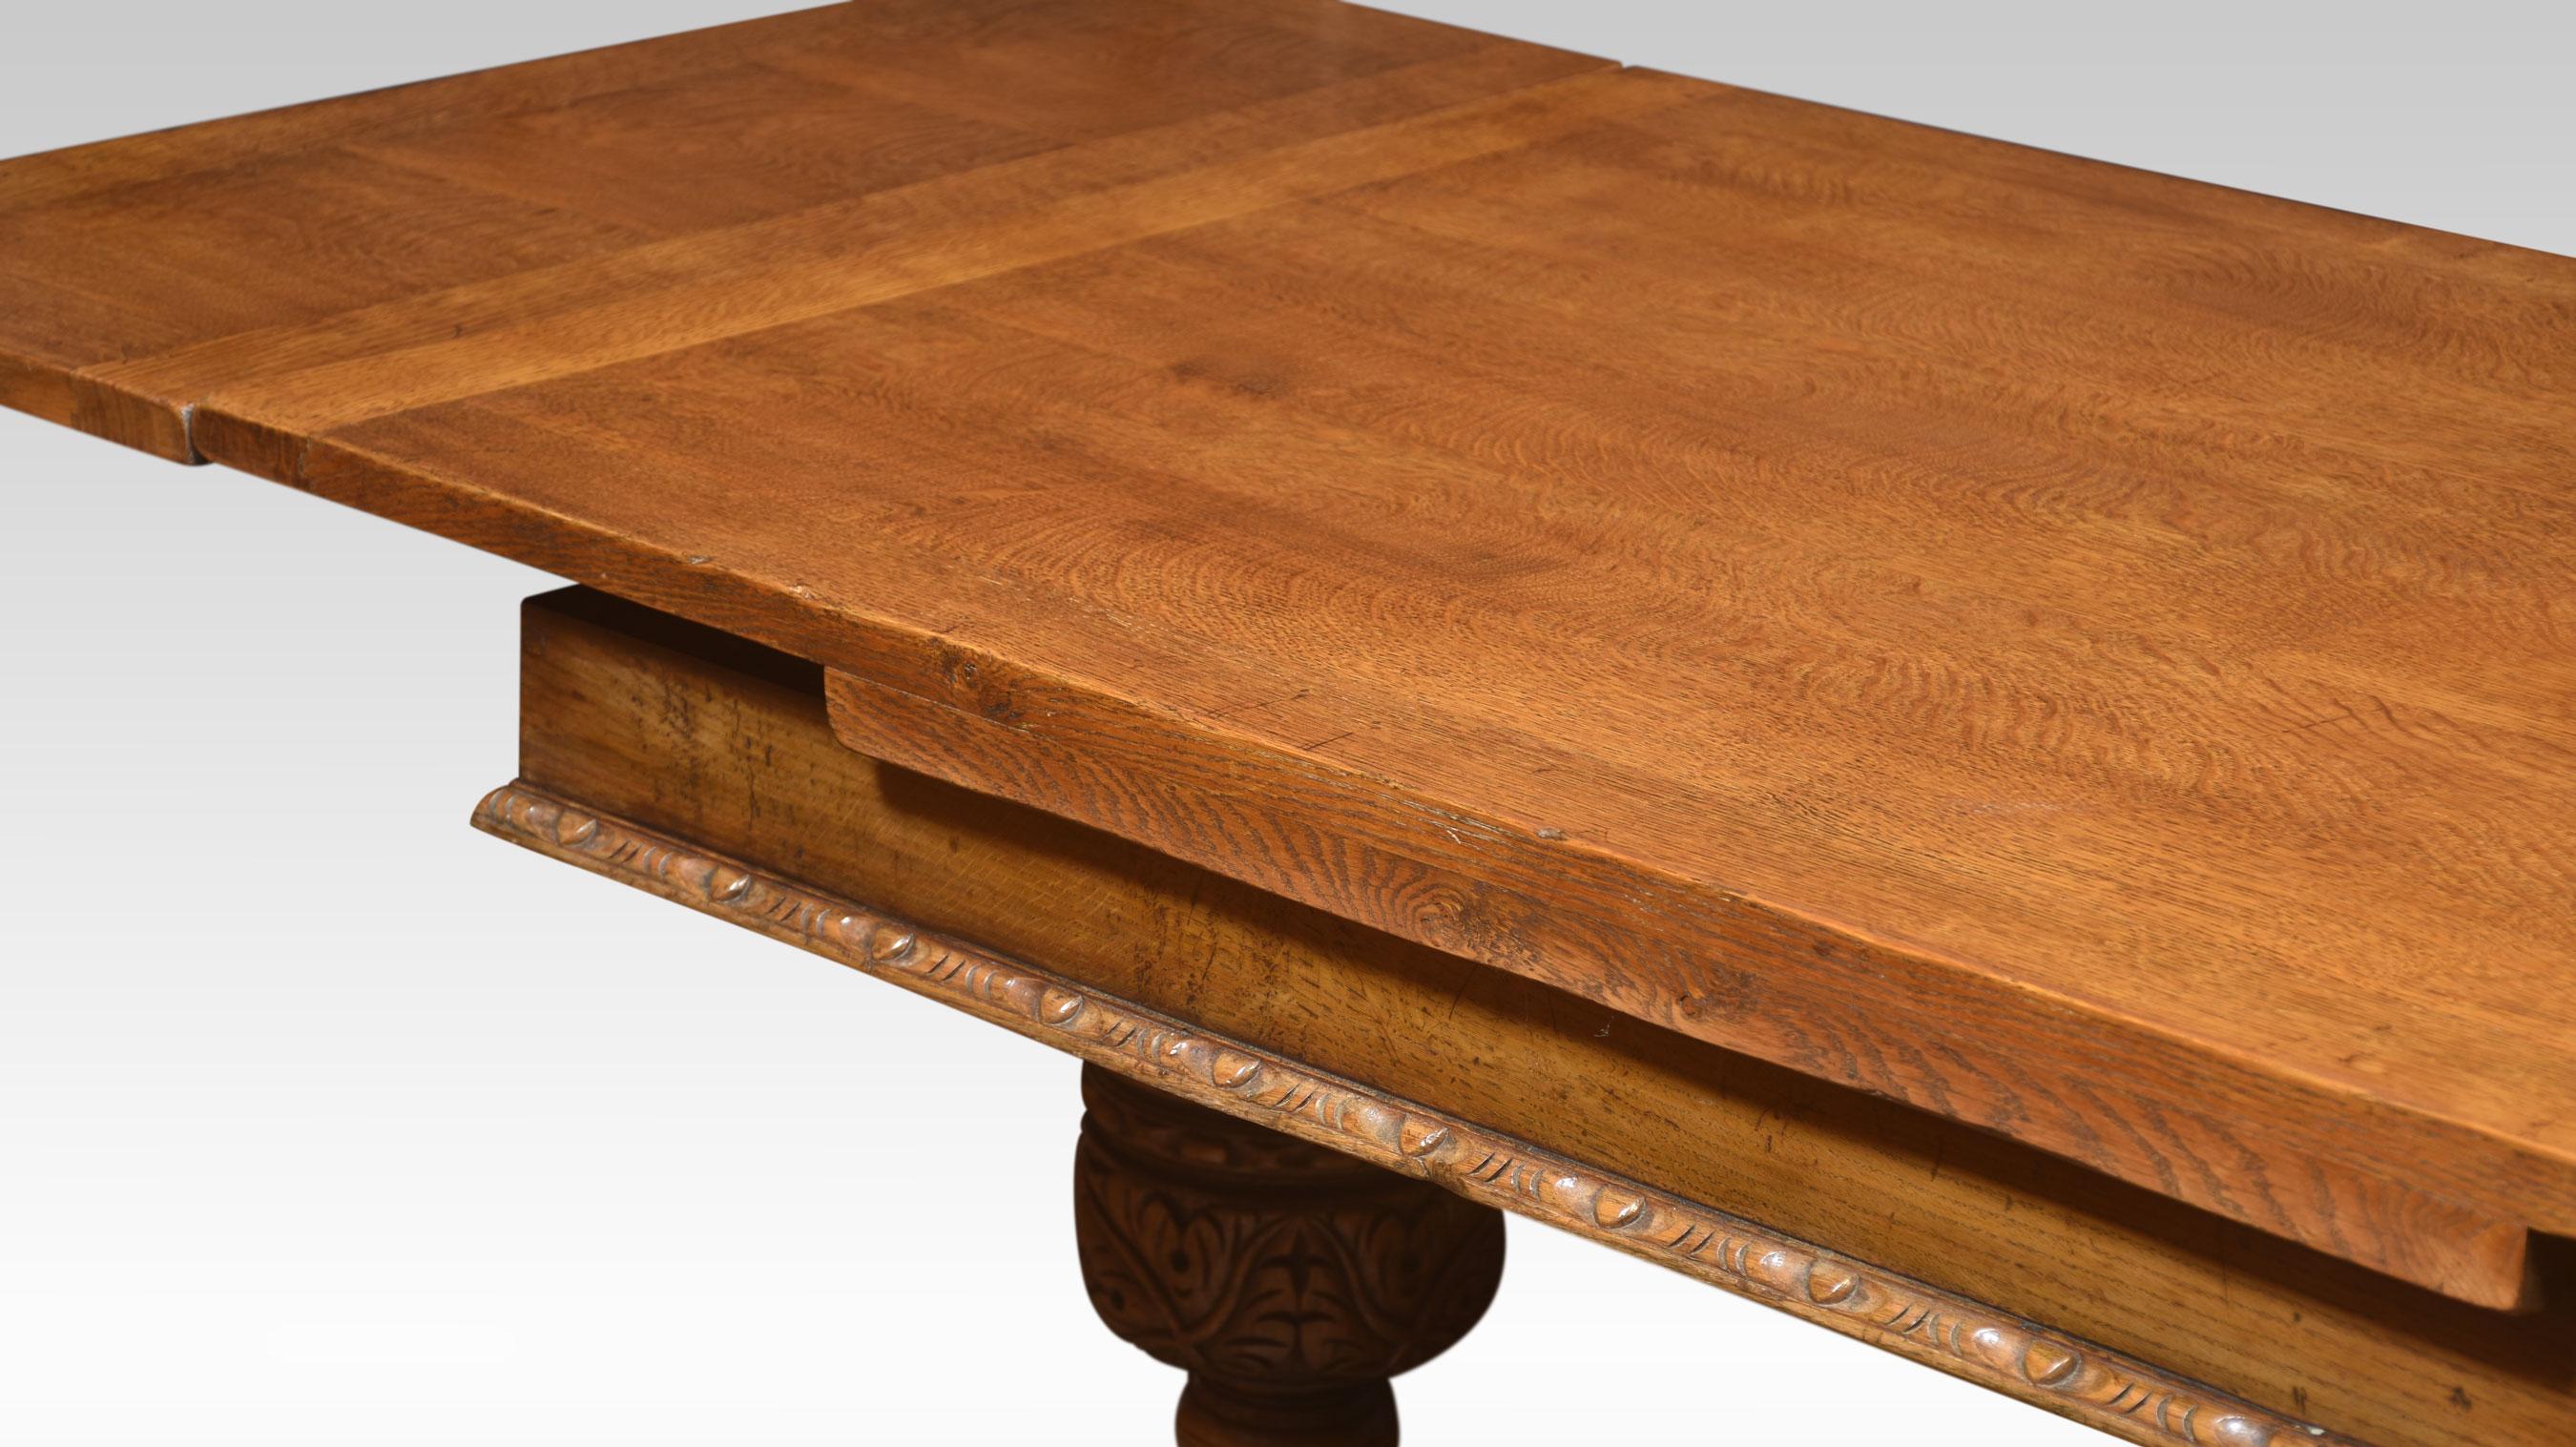 Oak draw leaf refectory table, the rectangular solid oak top having pull out ends. Above carved bulbous cup and cover supports united by a stretcher.
Dimensions
Height 30.5 Inches
Width 60 Inches when open 90 Inches
Depth 36 Inches.